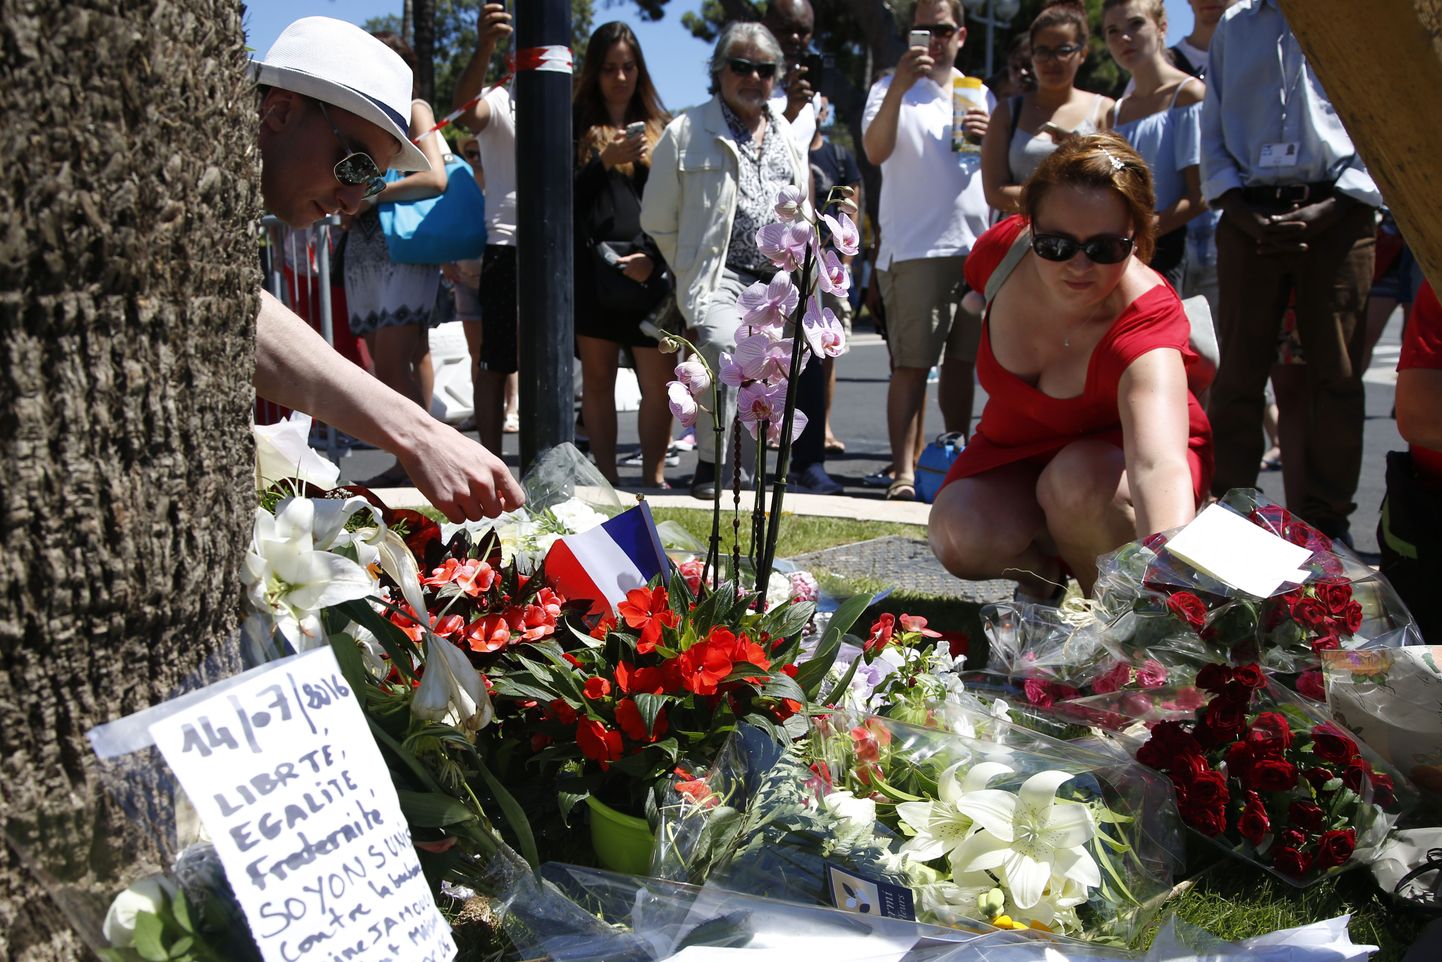 A woman places a bouquet of flowers as people pay tribute near the scene where a truck ran into a crowd at high speed killing scores and injuring more who were celebrating the Bastille Day national holiday, in Nice, France, July 15, 2016.   REUTERS/Pascal Rossignol